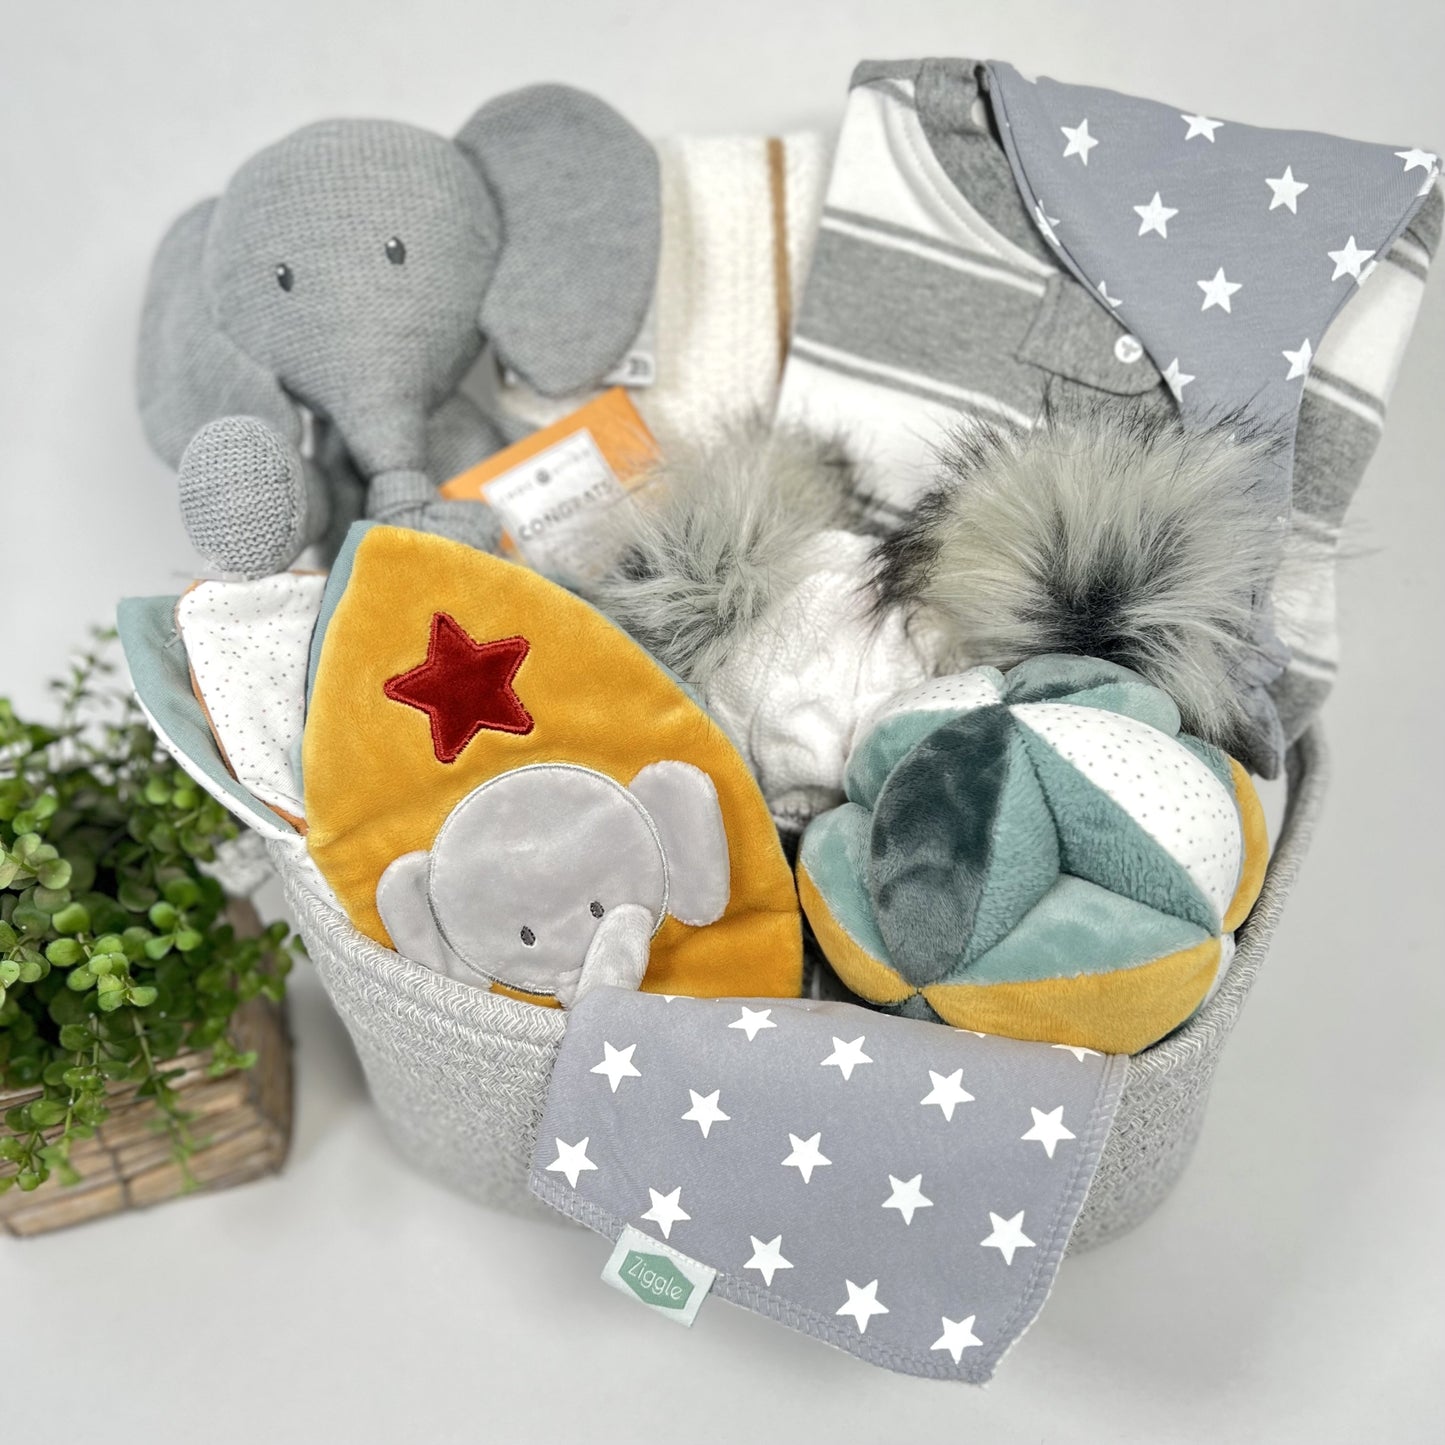 Tembo Elephant Luxury Unisex Baby Hamper Nappy Caddy Gift, Corporate  New baby Gifts, Tembo Elephant Soft Toy, Axel And Luna Sensory Baby Book